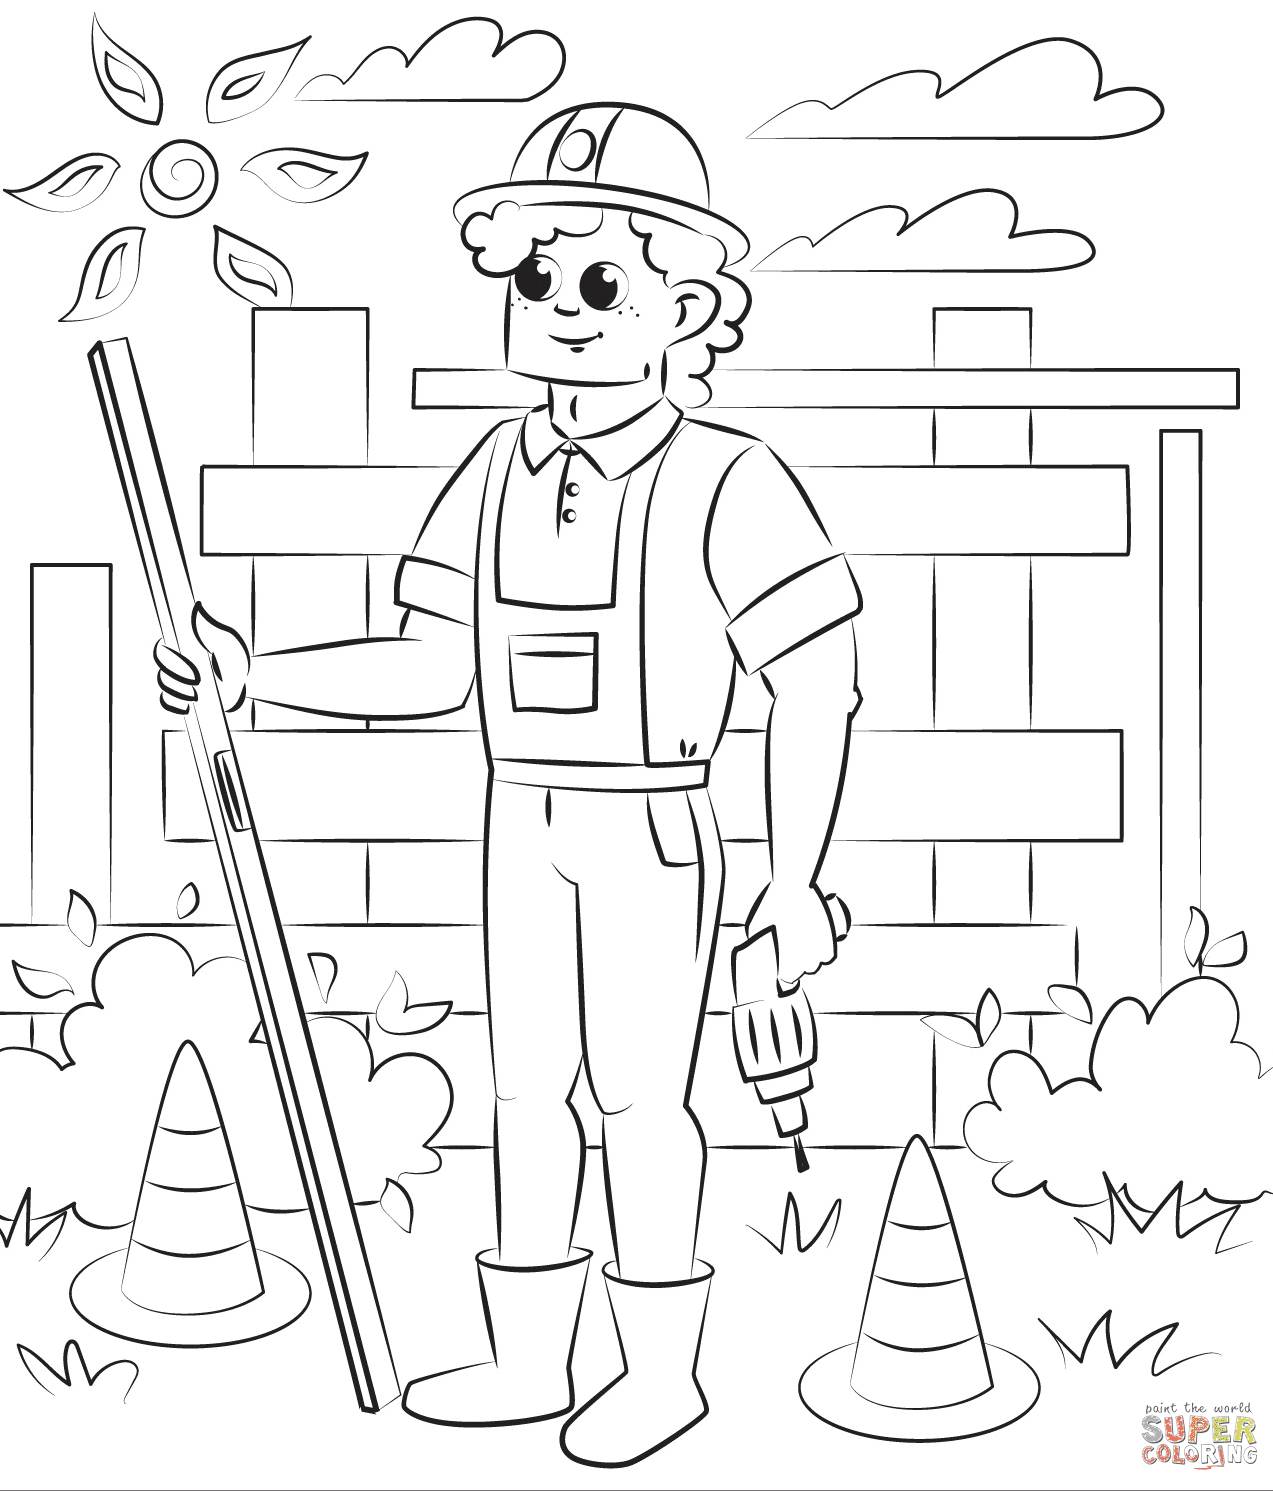 Printable Construction Worker Coloring Page